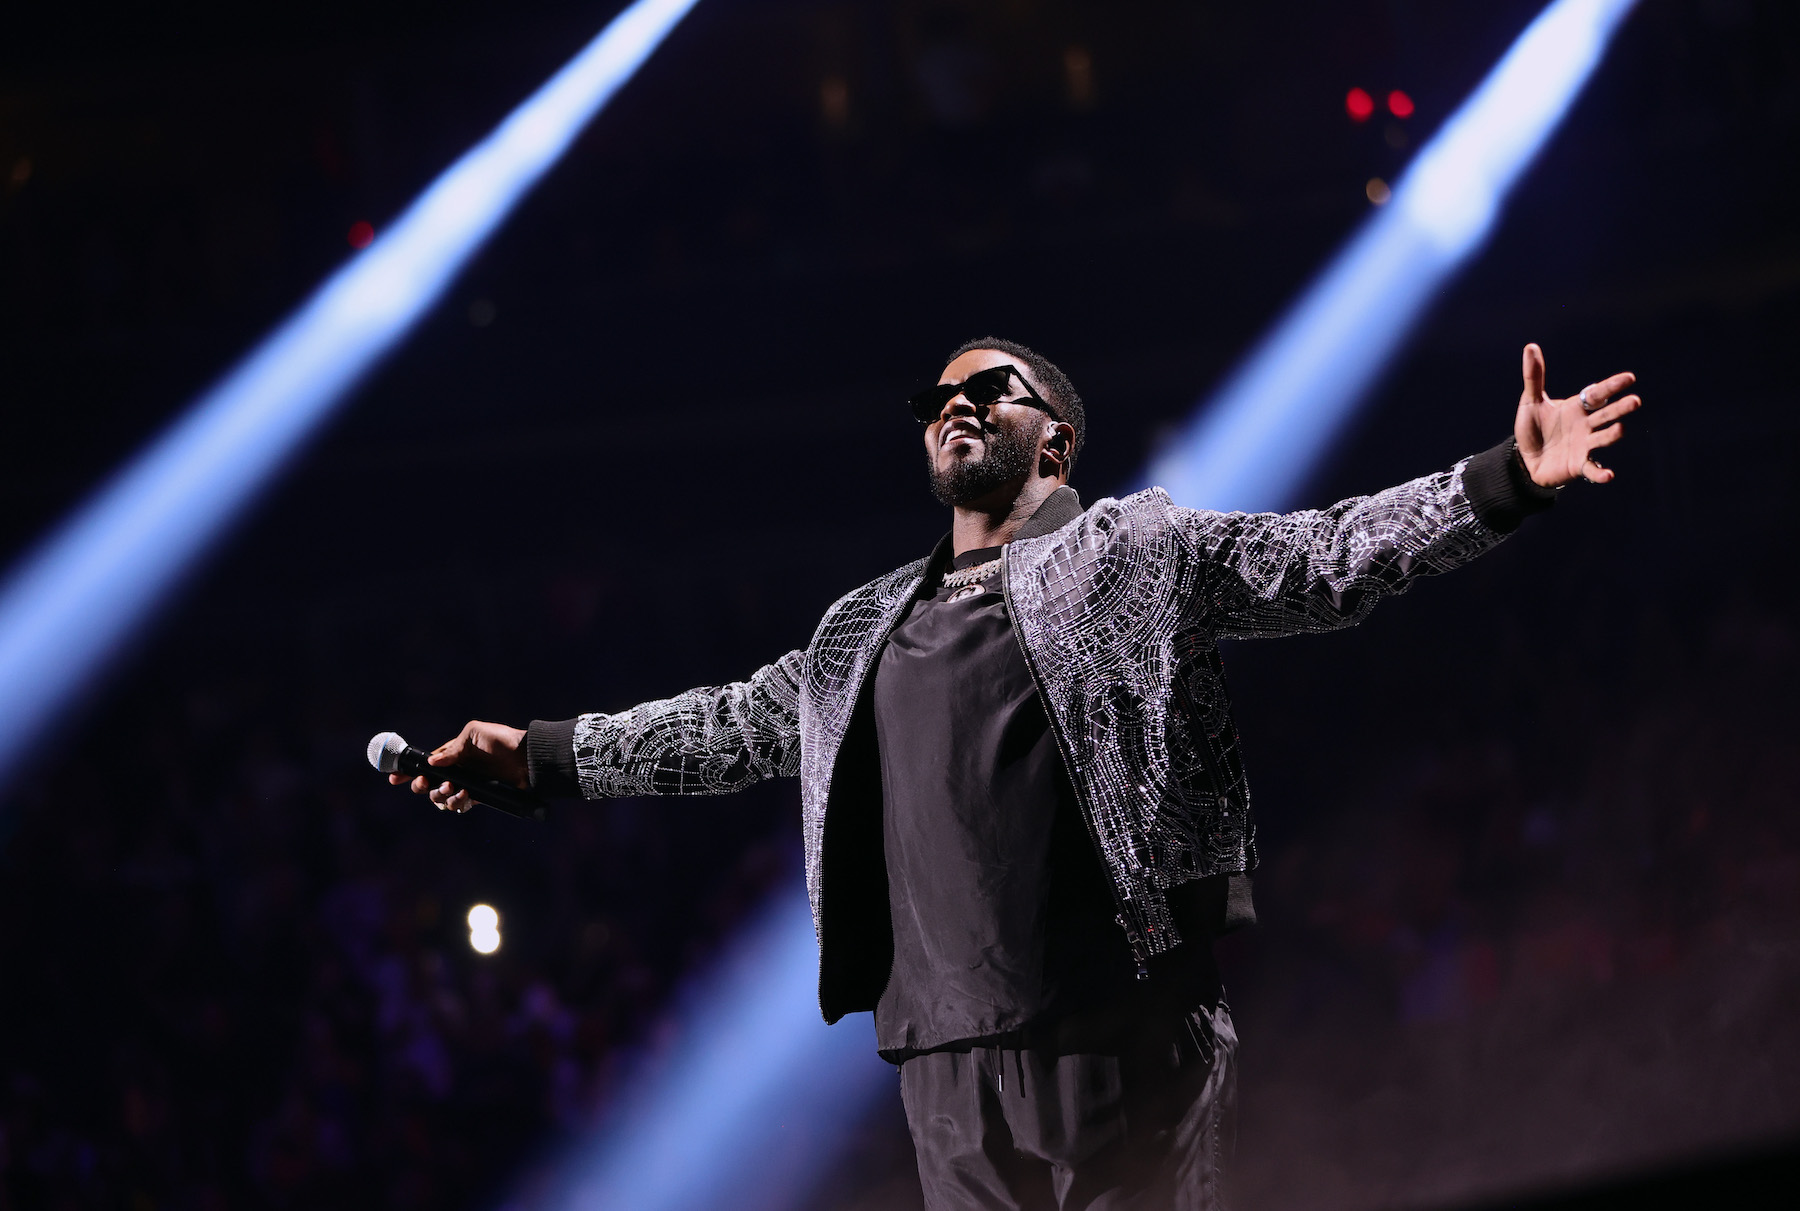 Sean “Diddy" Combs, known for throwing big parties, on stage with his arms spread